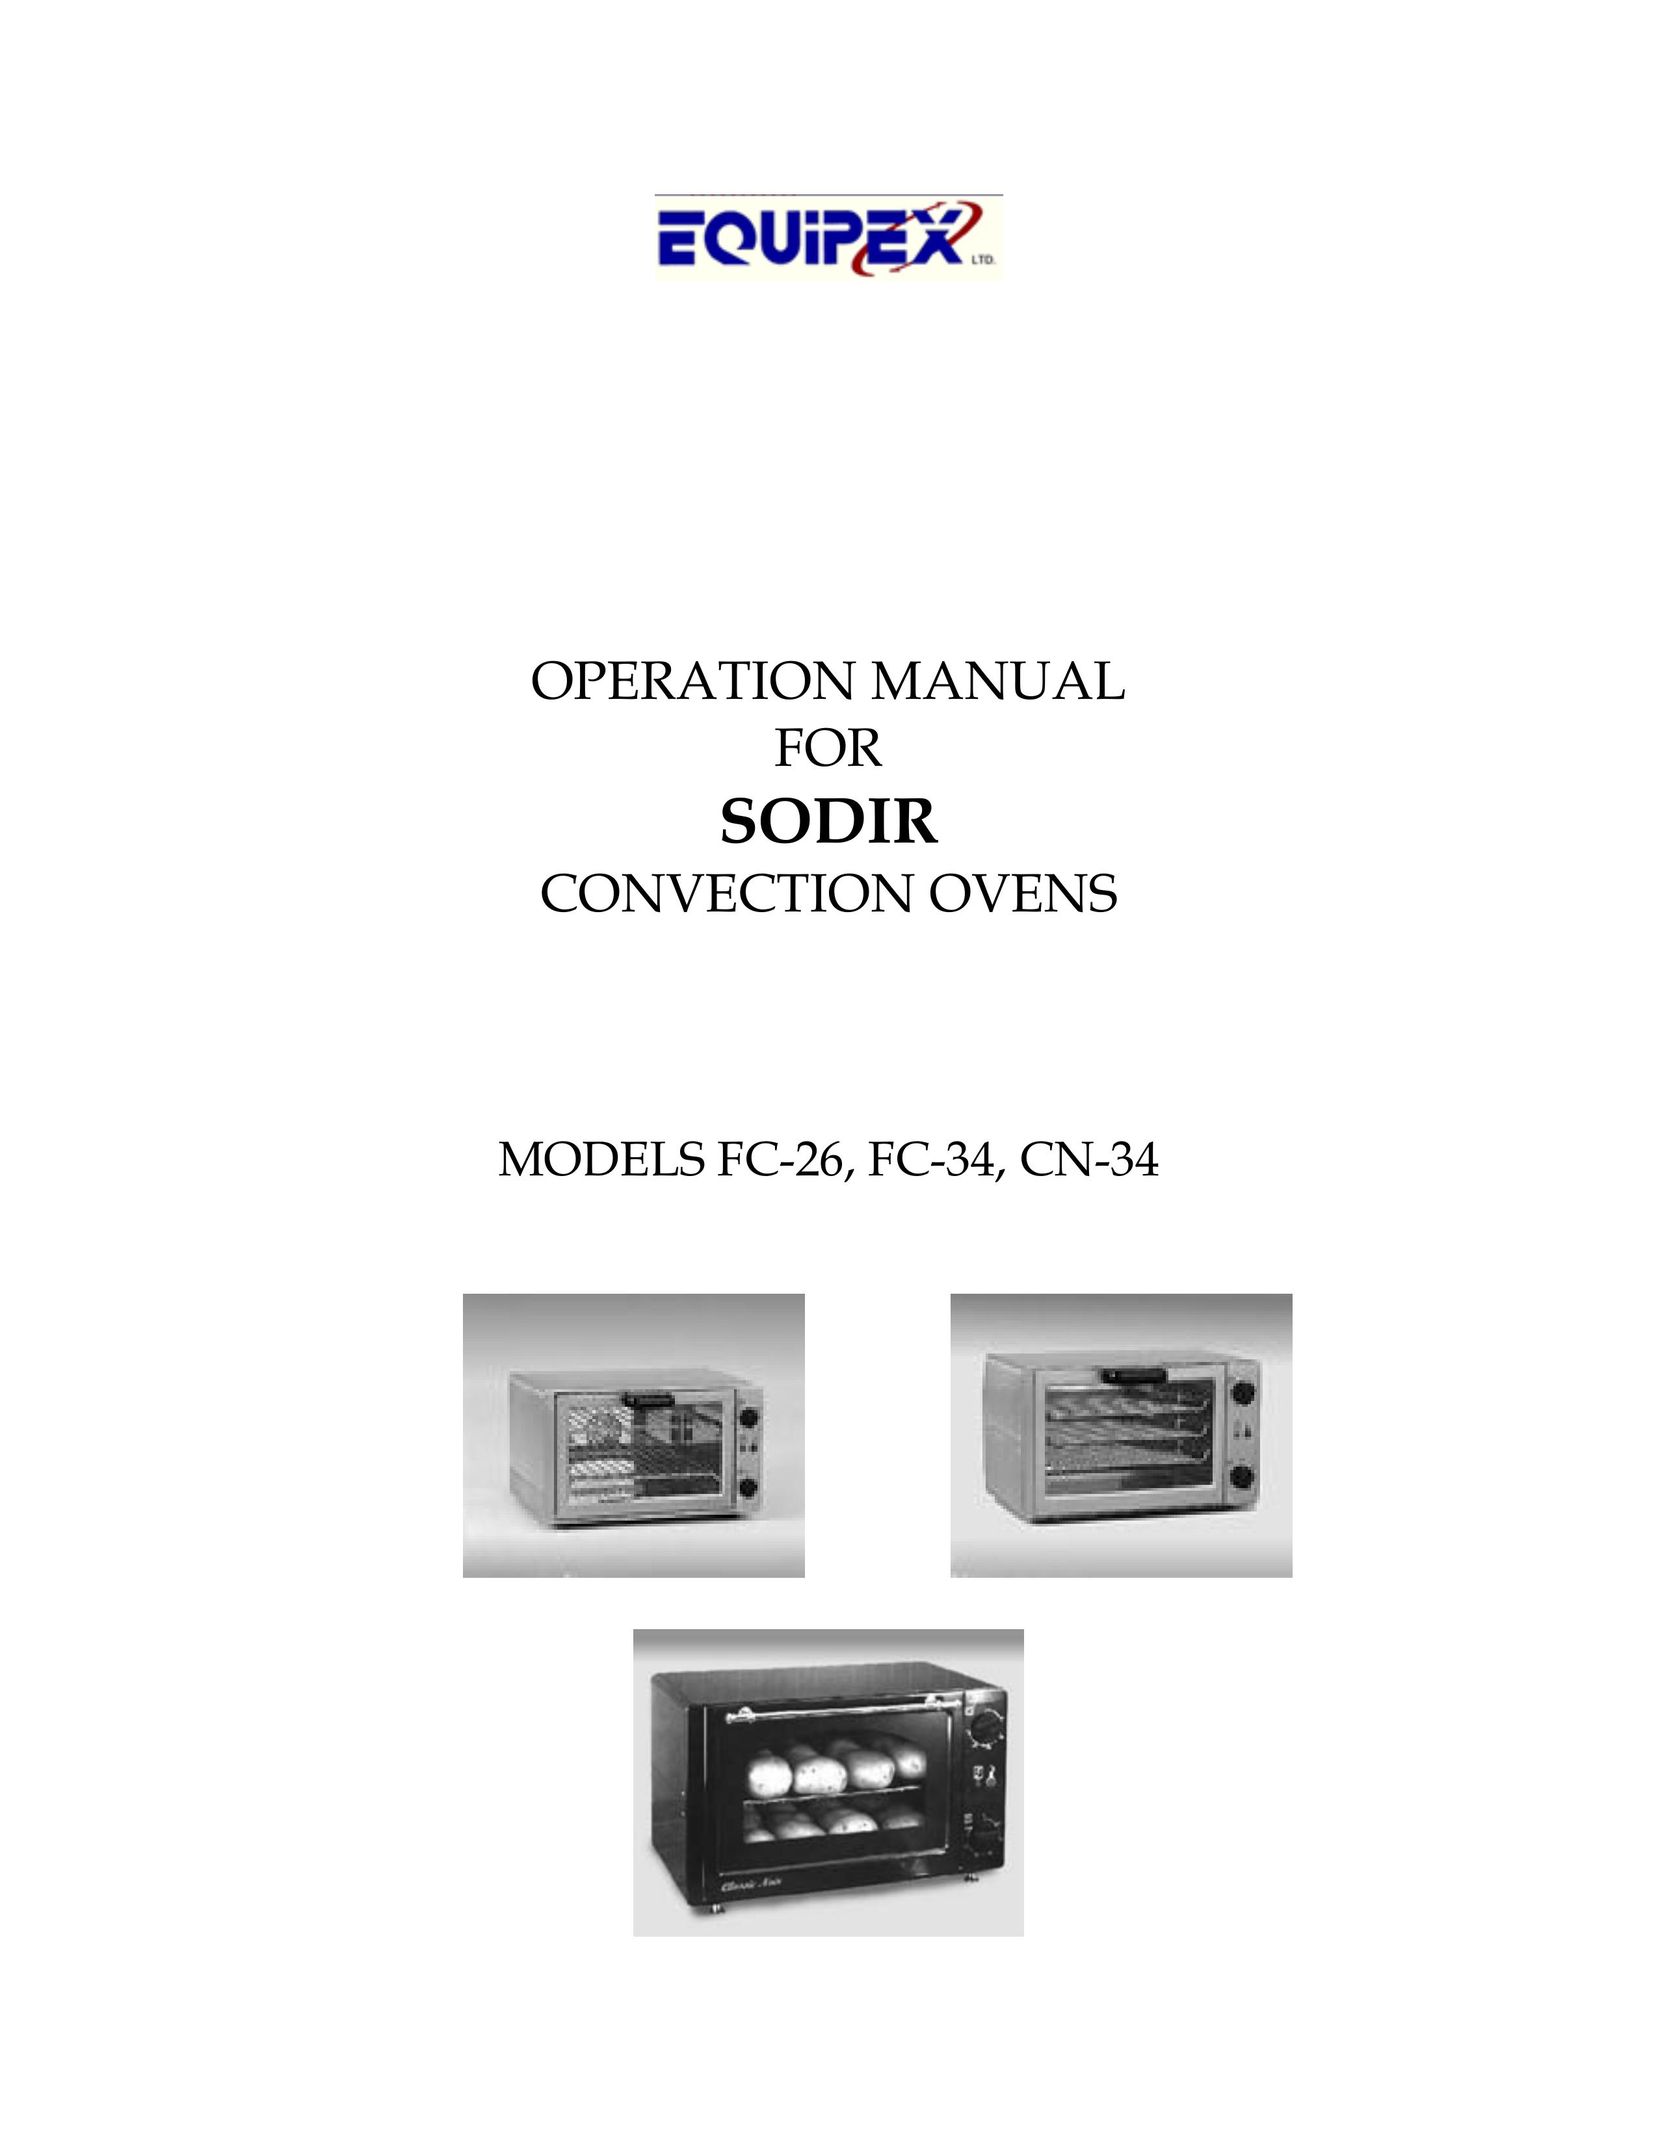 Equipex CN-34 Convection Oven User Manual